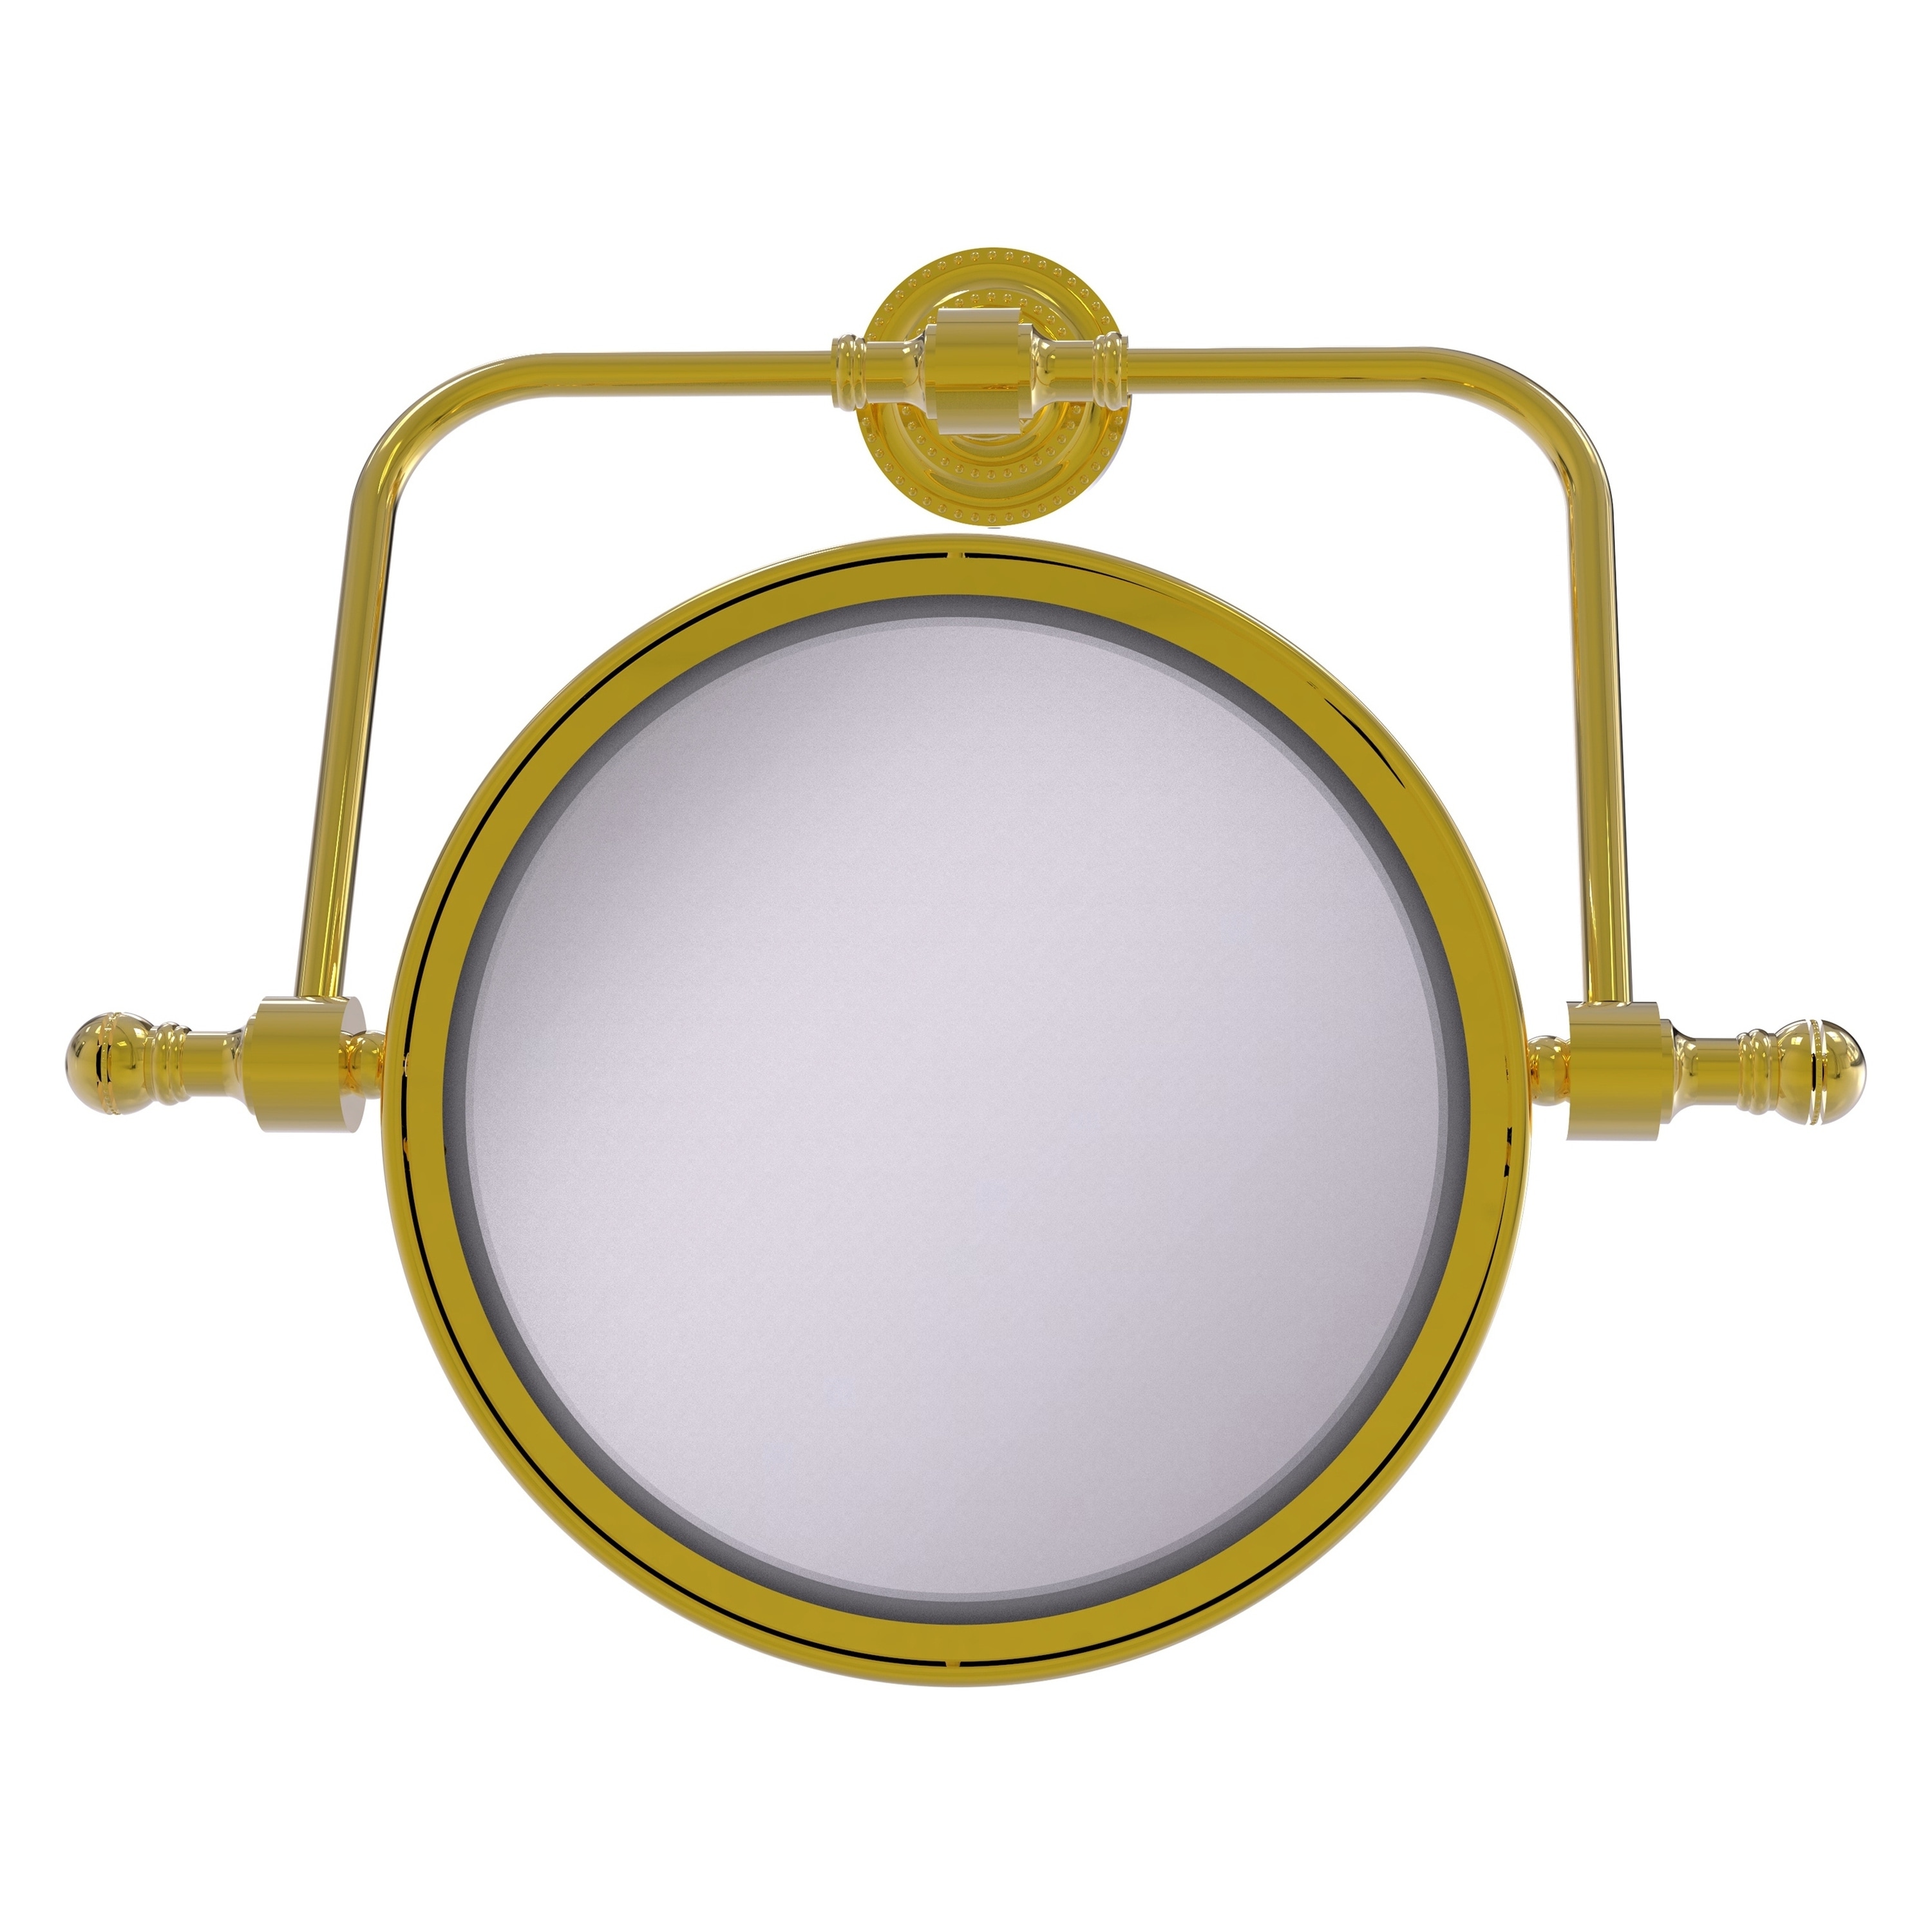 Retro Dot 7-in x 8-in Polished Silver Double-sided 2X Magnifying Wall-mounted Vanity Mirror | - Allied Brass RDM-4/2X-PB